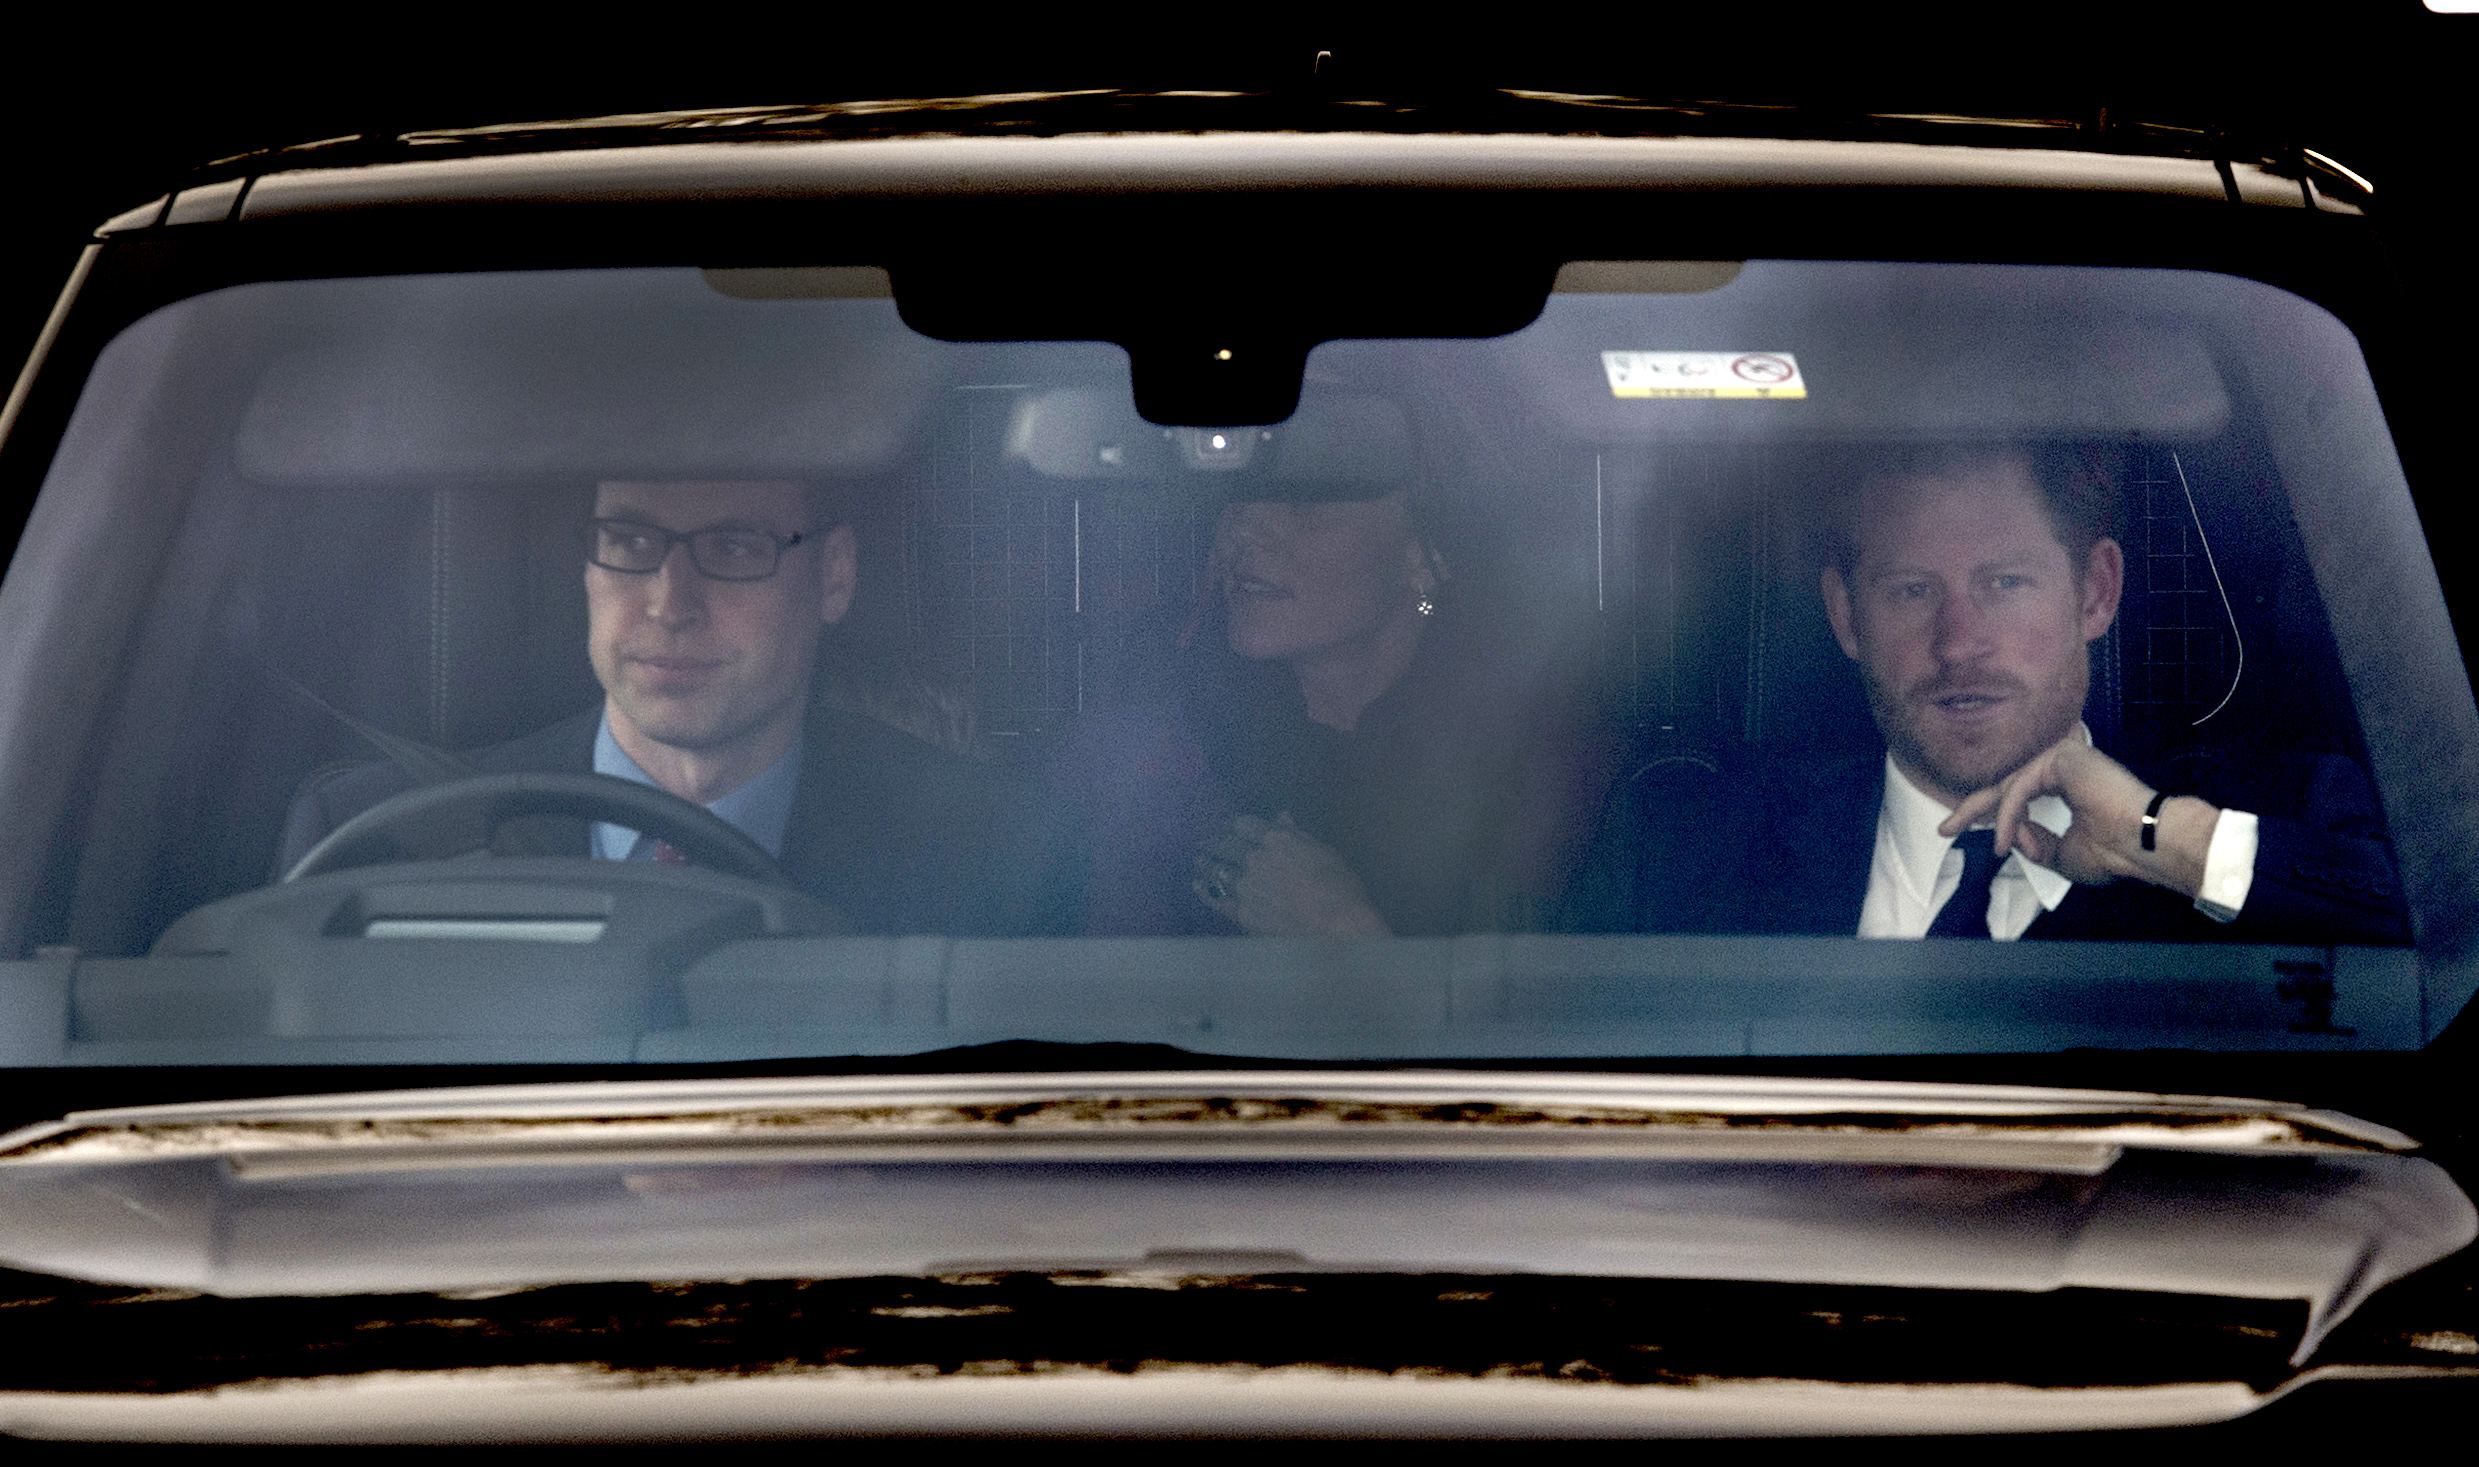 PHOTO: Prince William, Duke of Cambridge, behind the wheel, and Prince Harry with Catherine, Duchess of Cambridge arrive for the annual Buckingham Palace Christmas lunch hosted by The Queen at Buckingham Palace on December 20, 2016 in London, England.